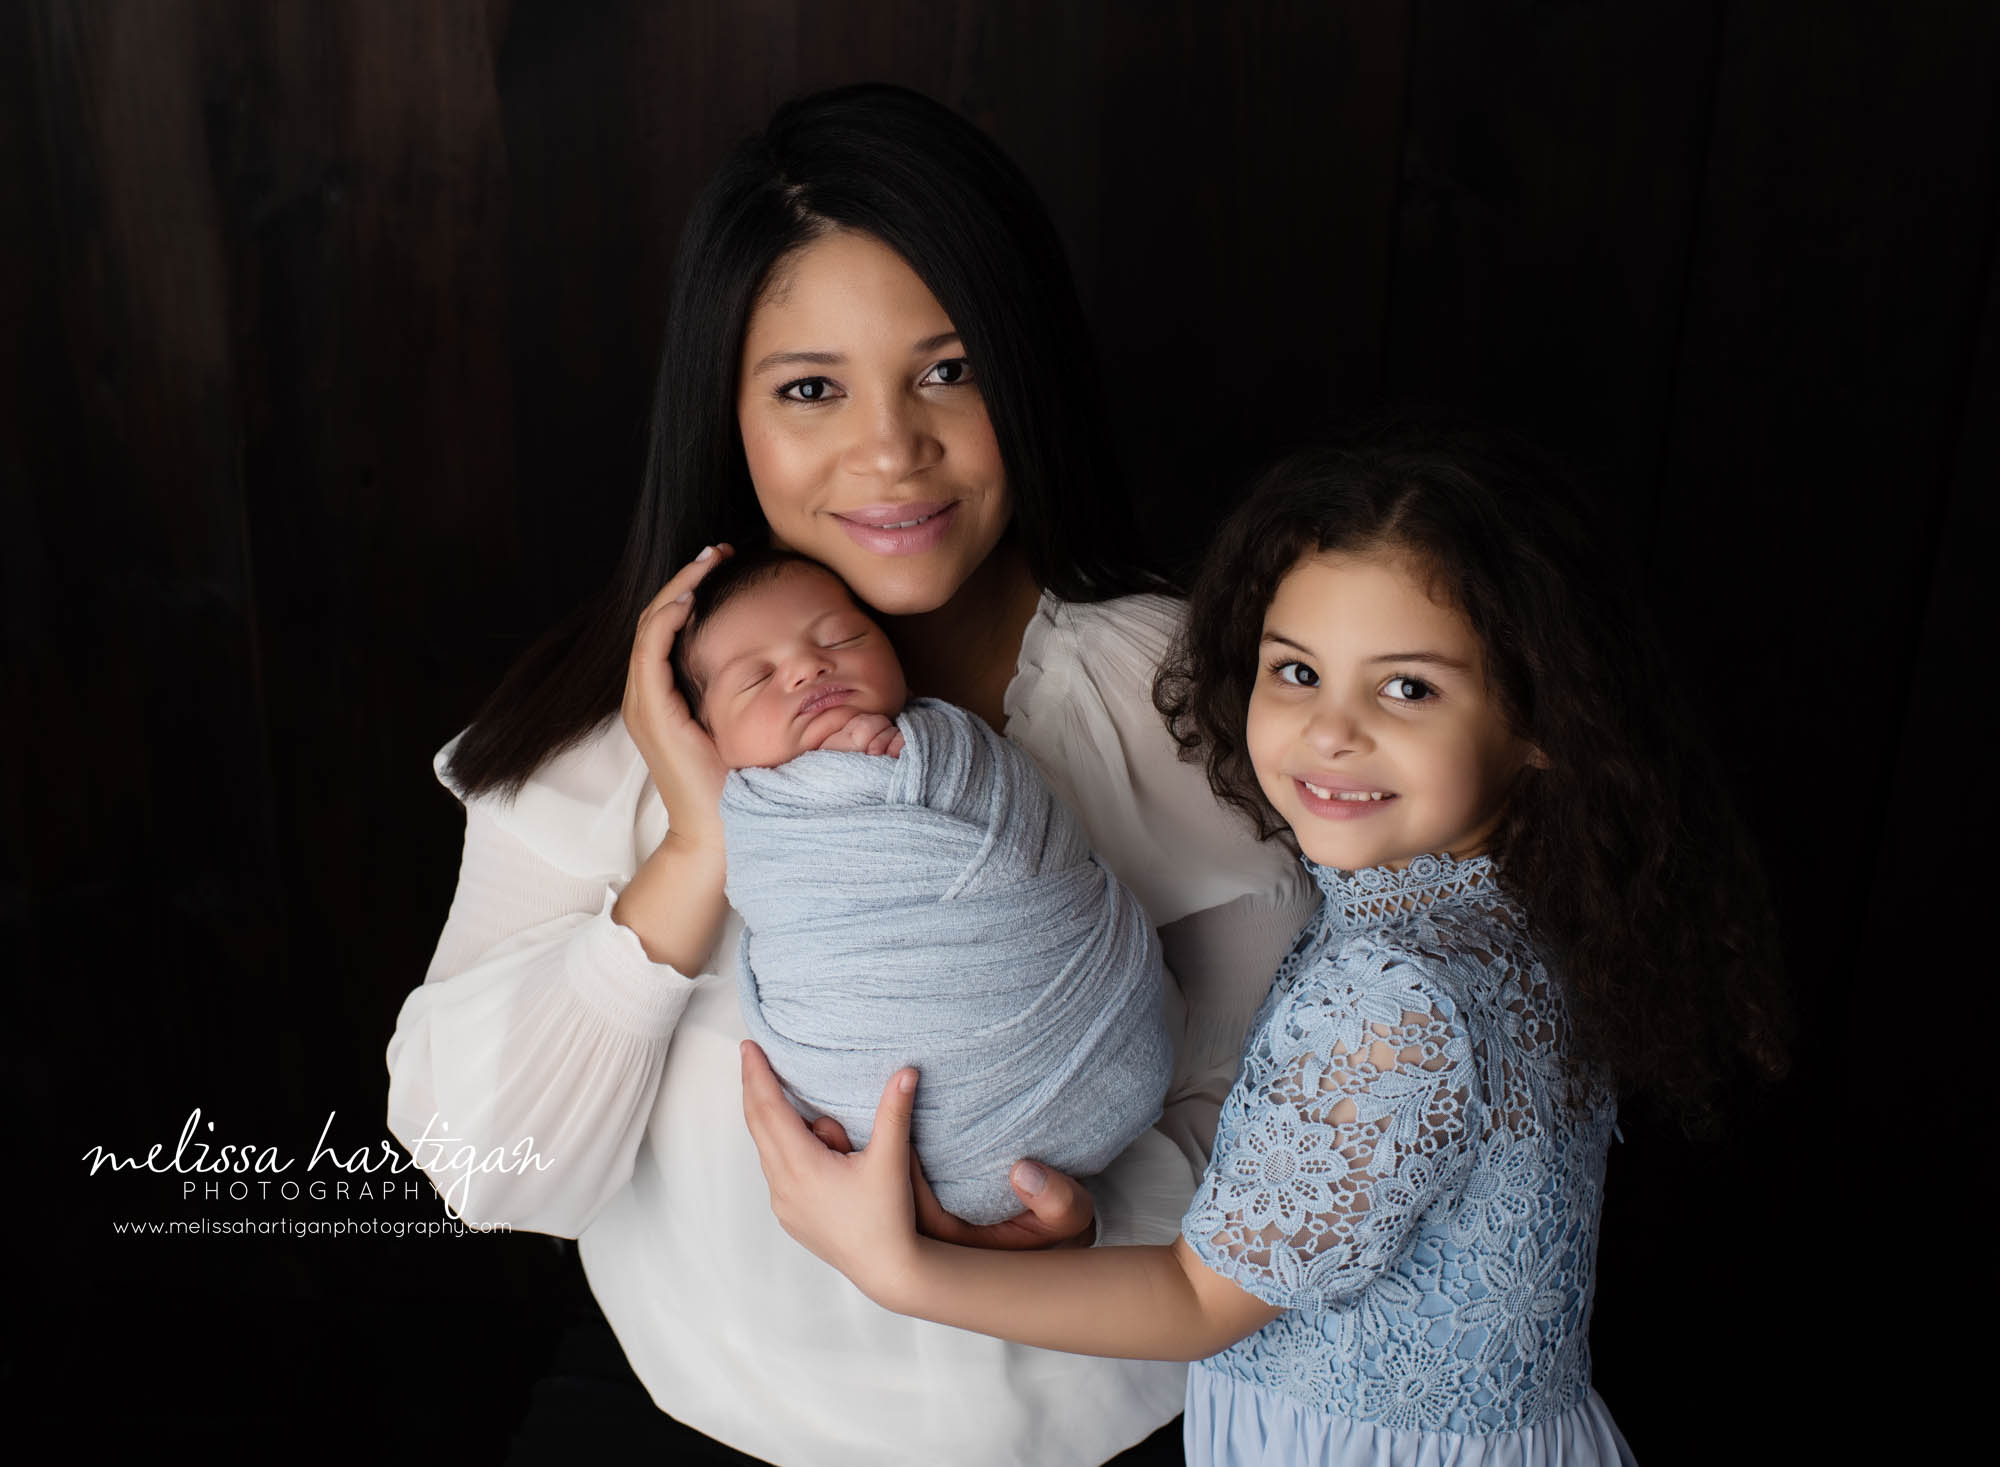 Newborn baby boy with mom and older sister studio photography session pose